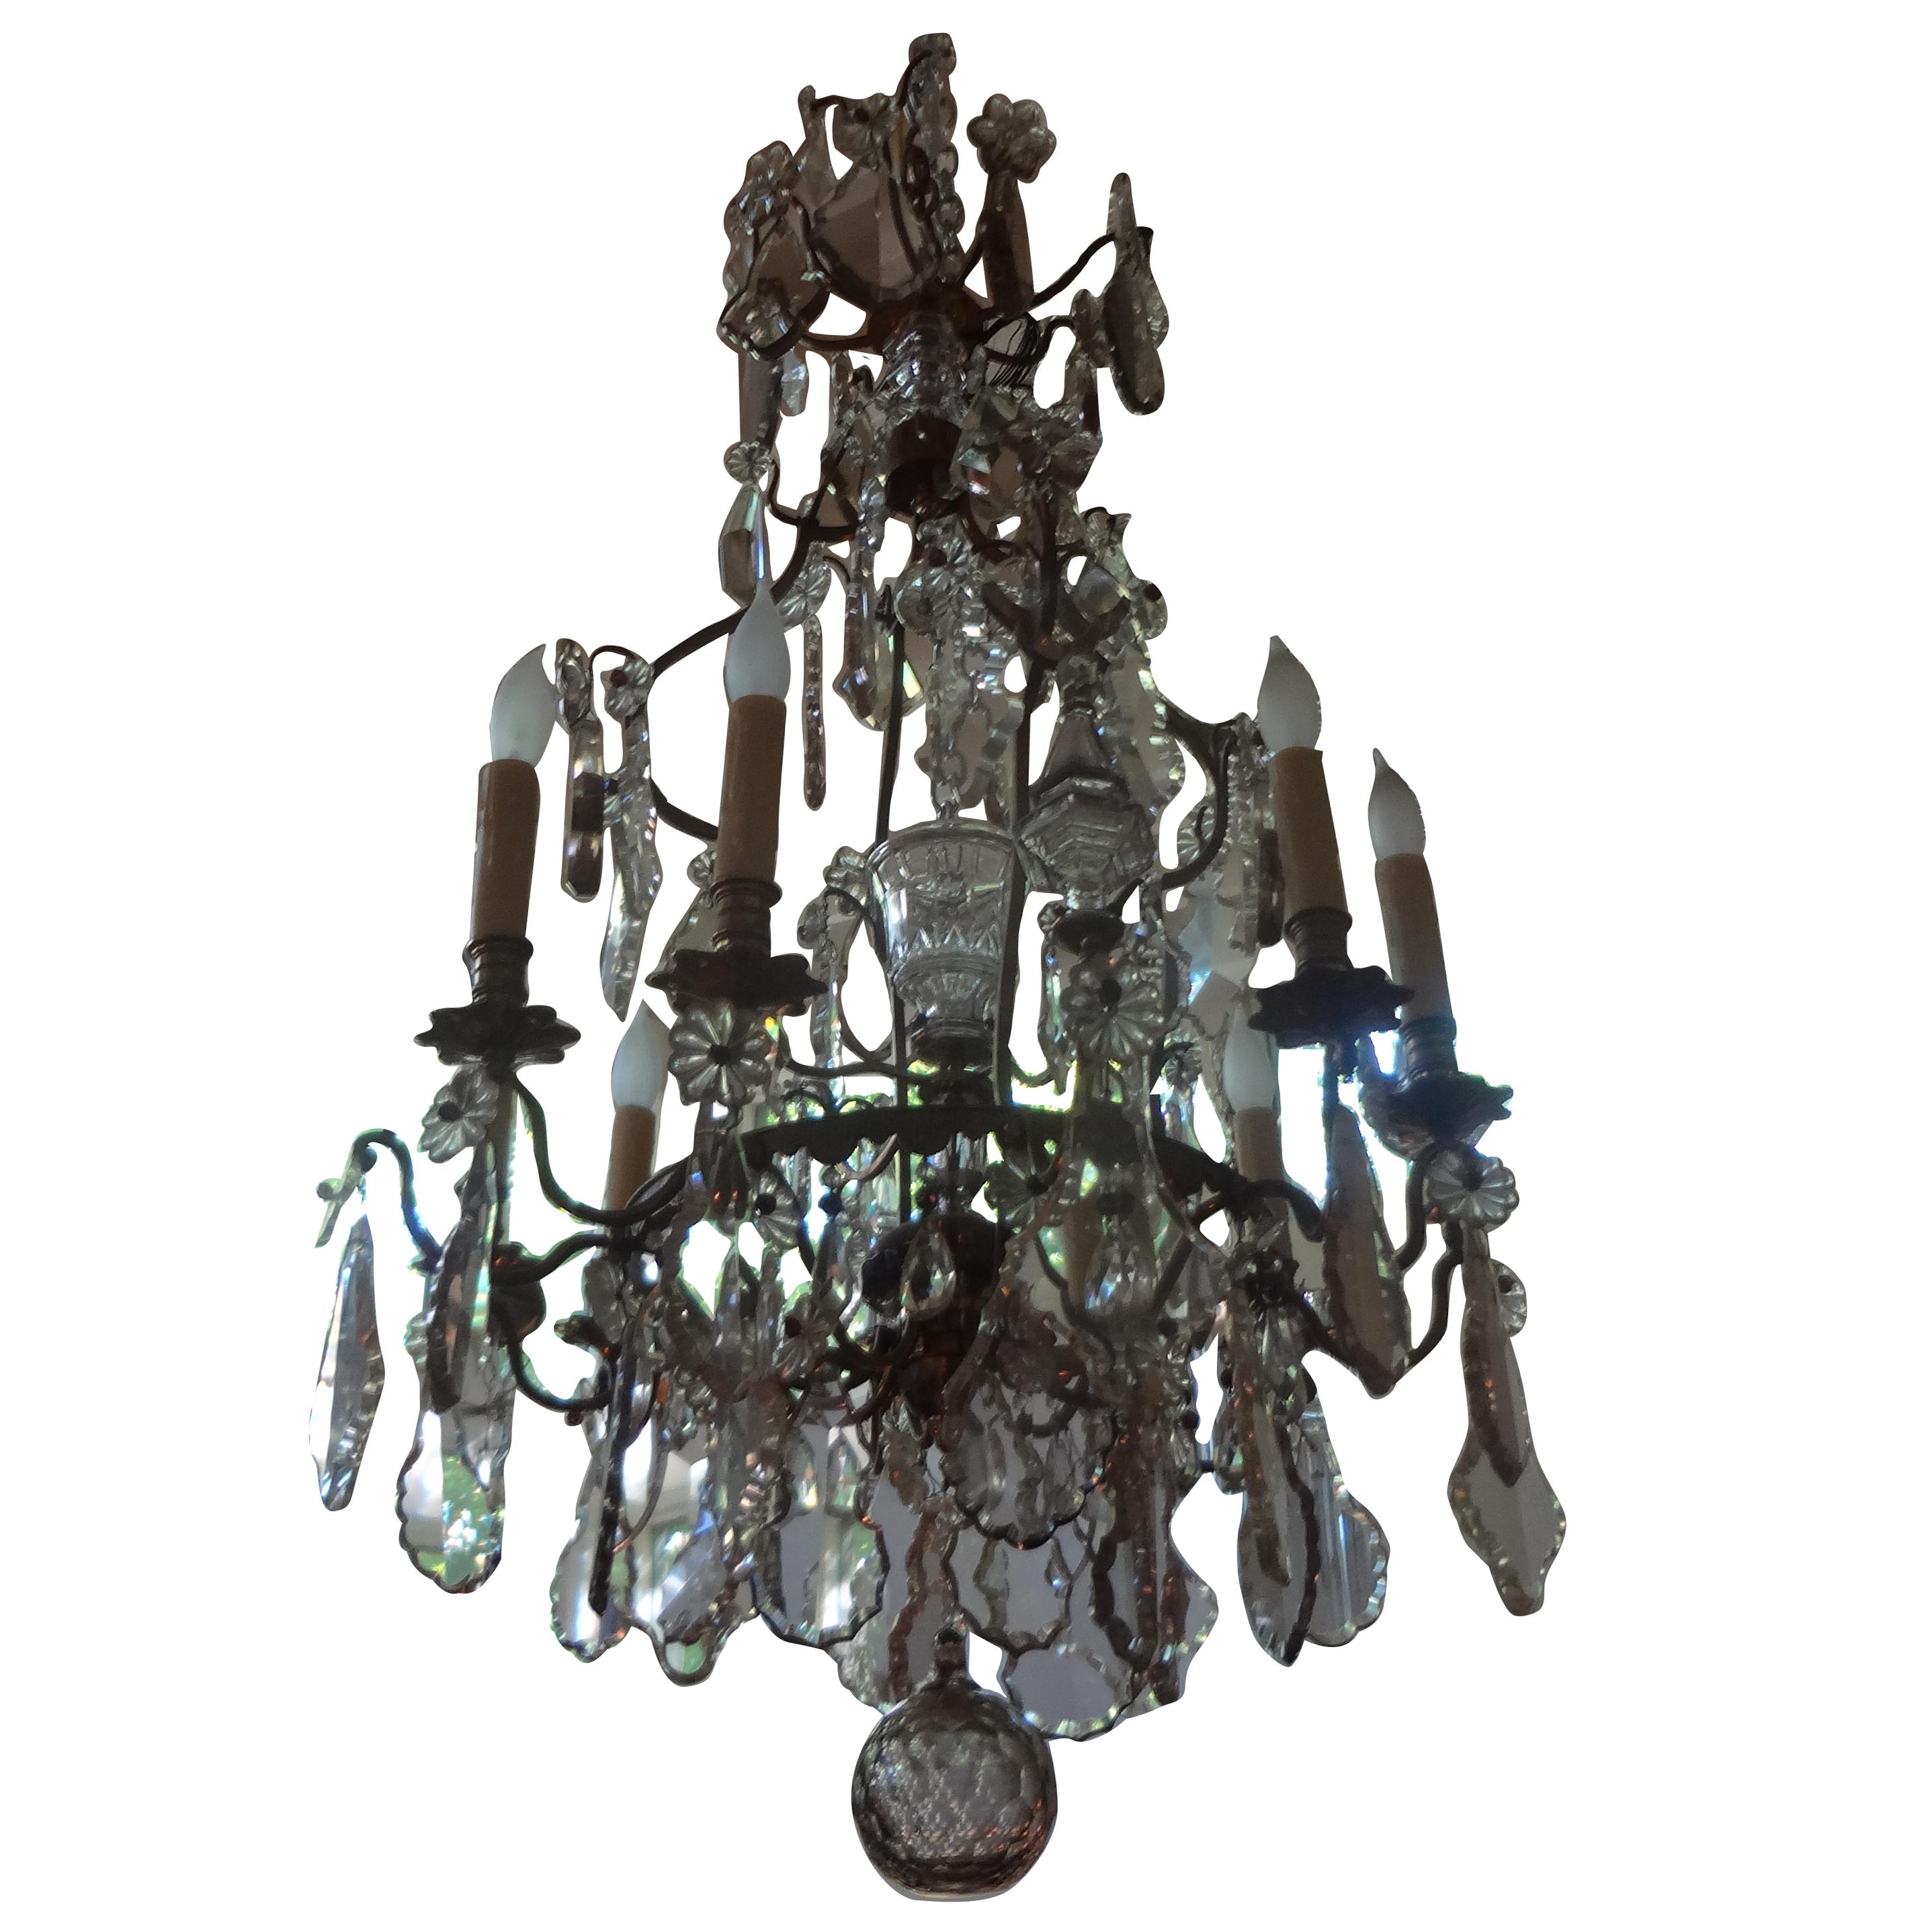 Antique French Baccarat style bronze and crystal chandelier.
Unusual antique French Louis XVI style 8-light crystal chandelier, circa 1920. This stunning large antique French crystal chandelier, possibly Baccarat, has been newly wired and can be